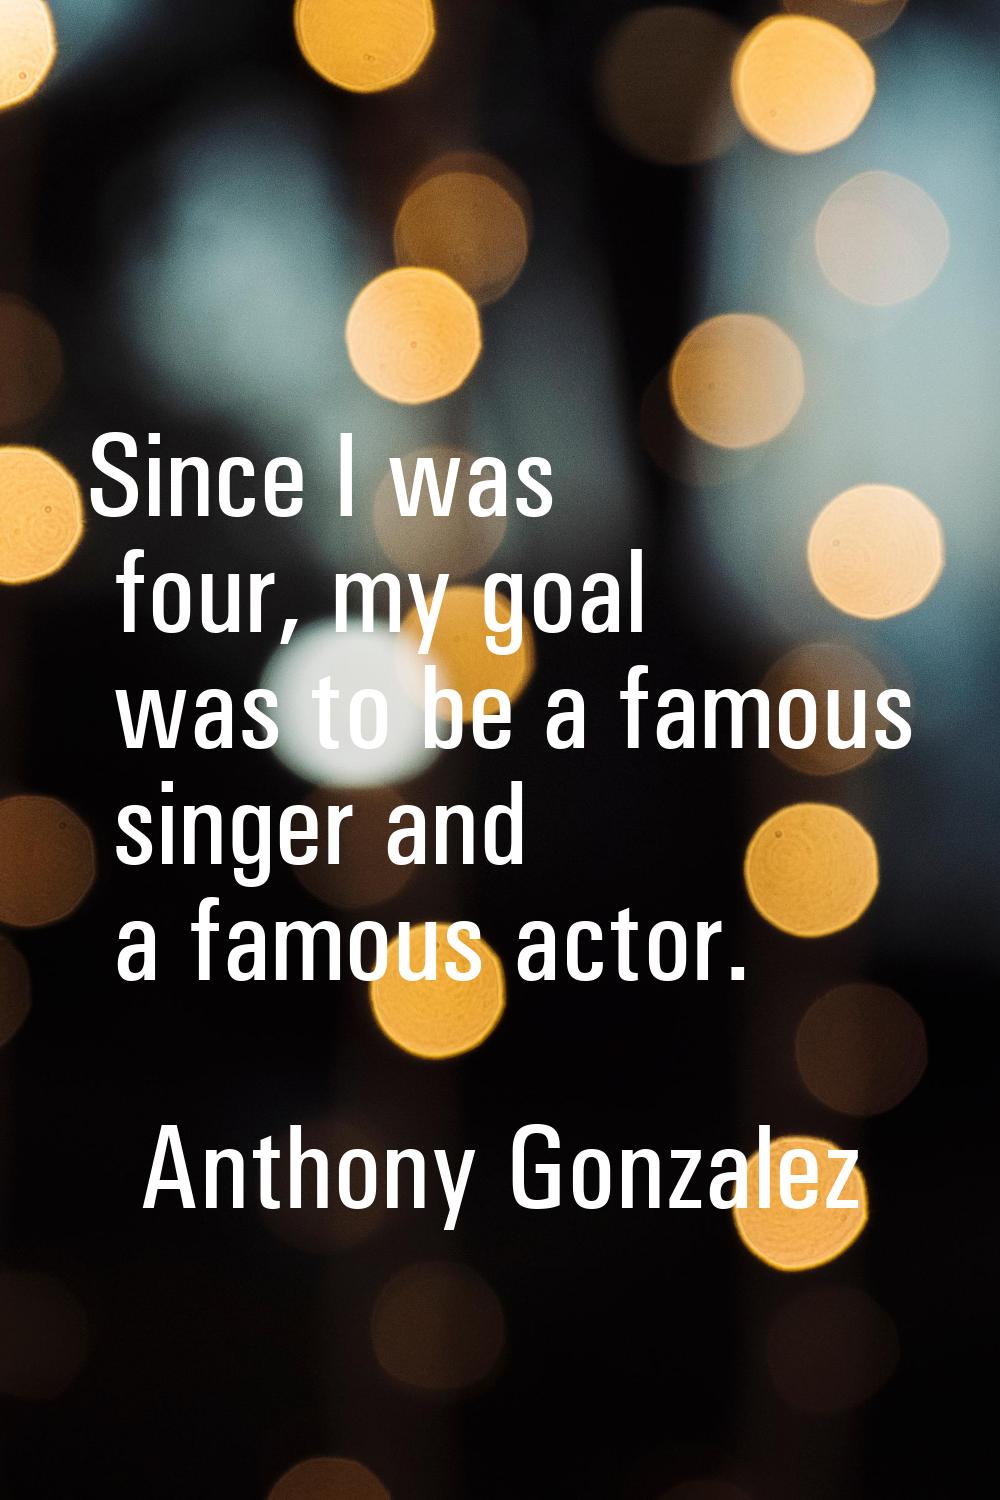 Since I was four, my goal was to be a famous singer and a famous actor.